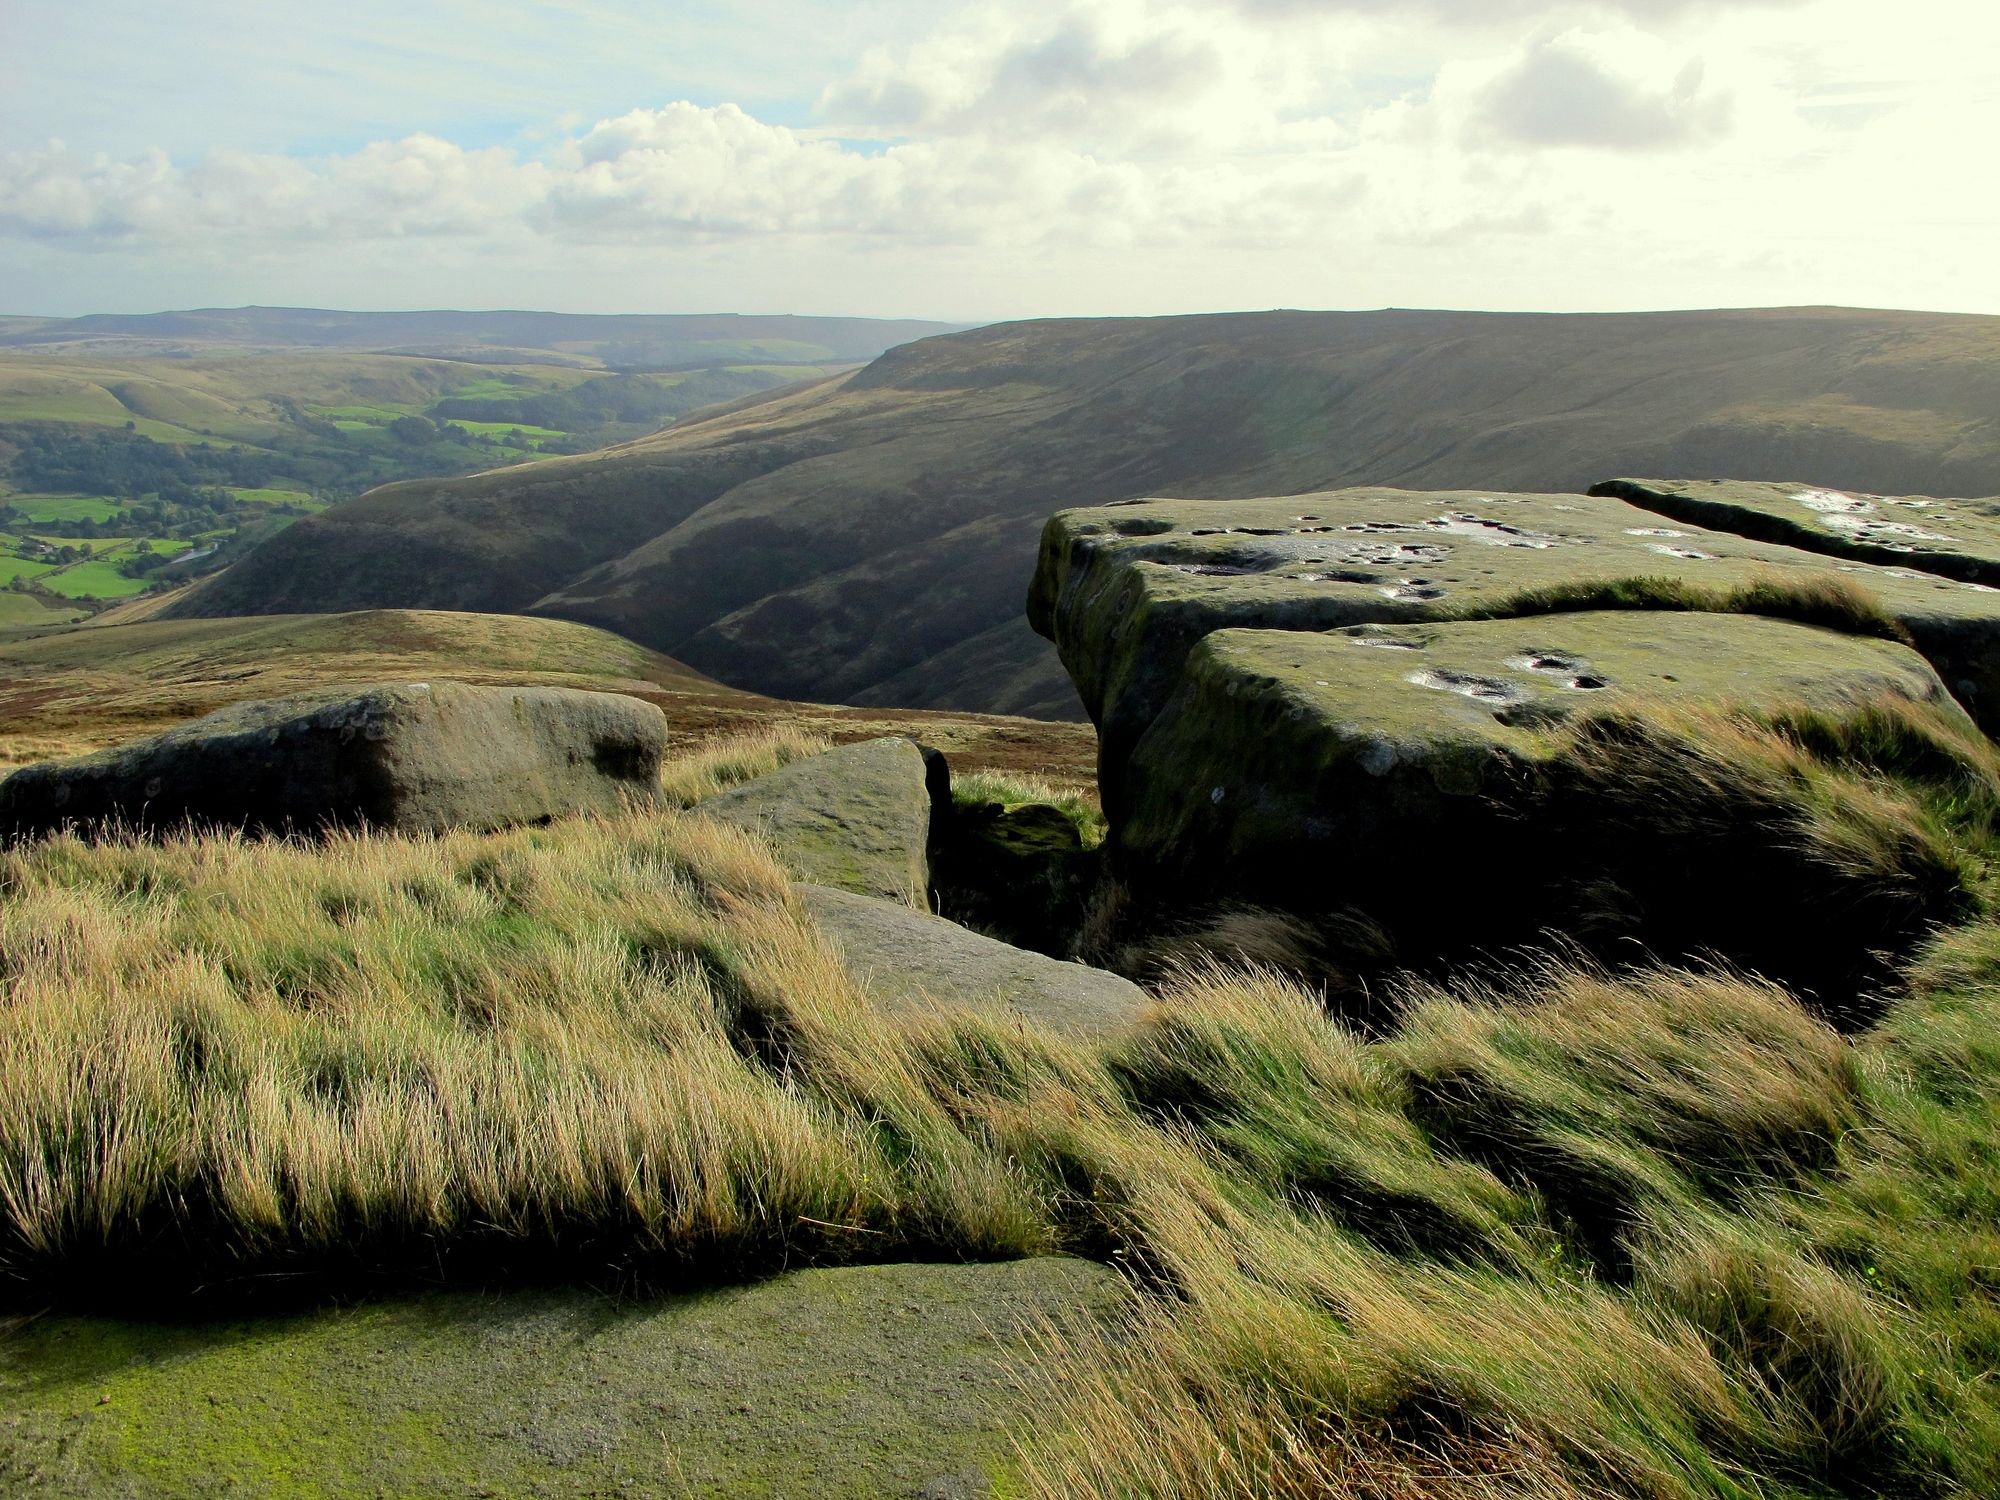 A majestic view of Kinder Scout with the gritstone rocks, moors and rolling hills in the Derbyshire high peak. Photo: Getty